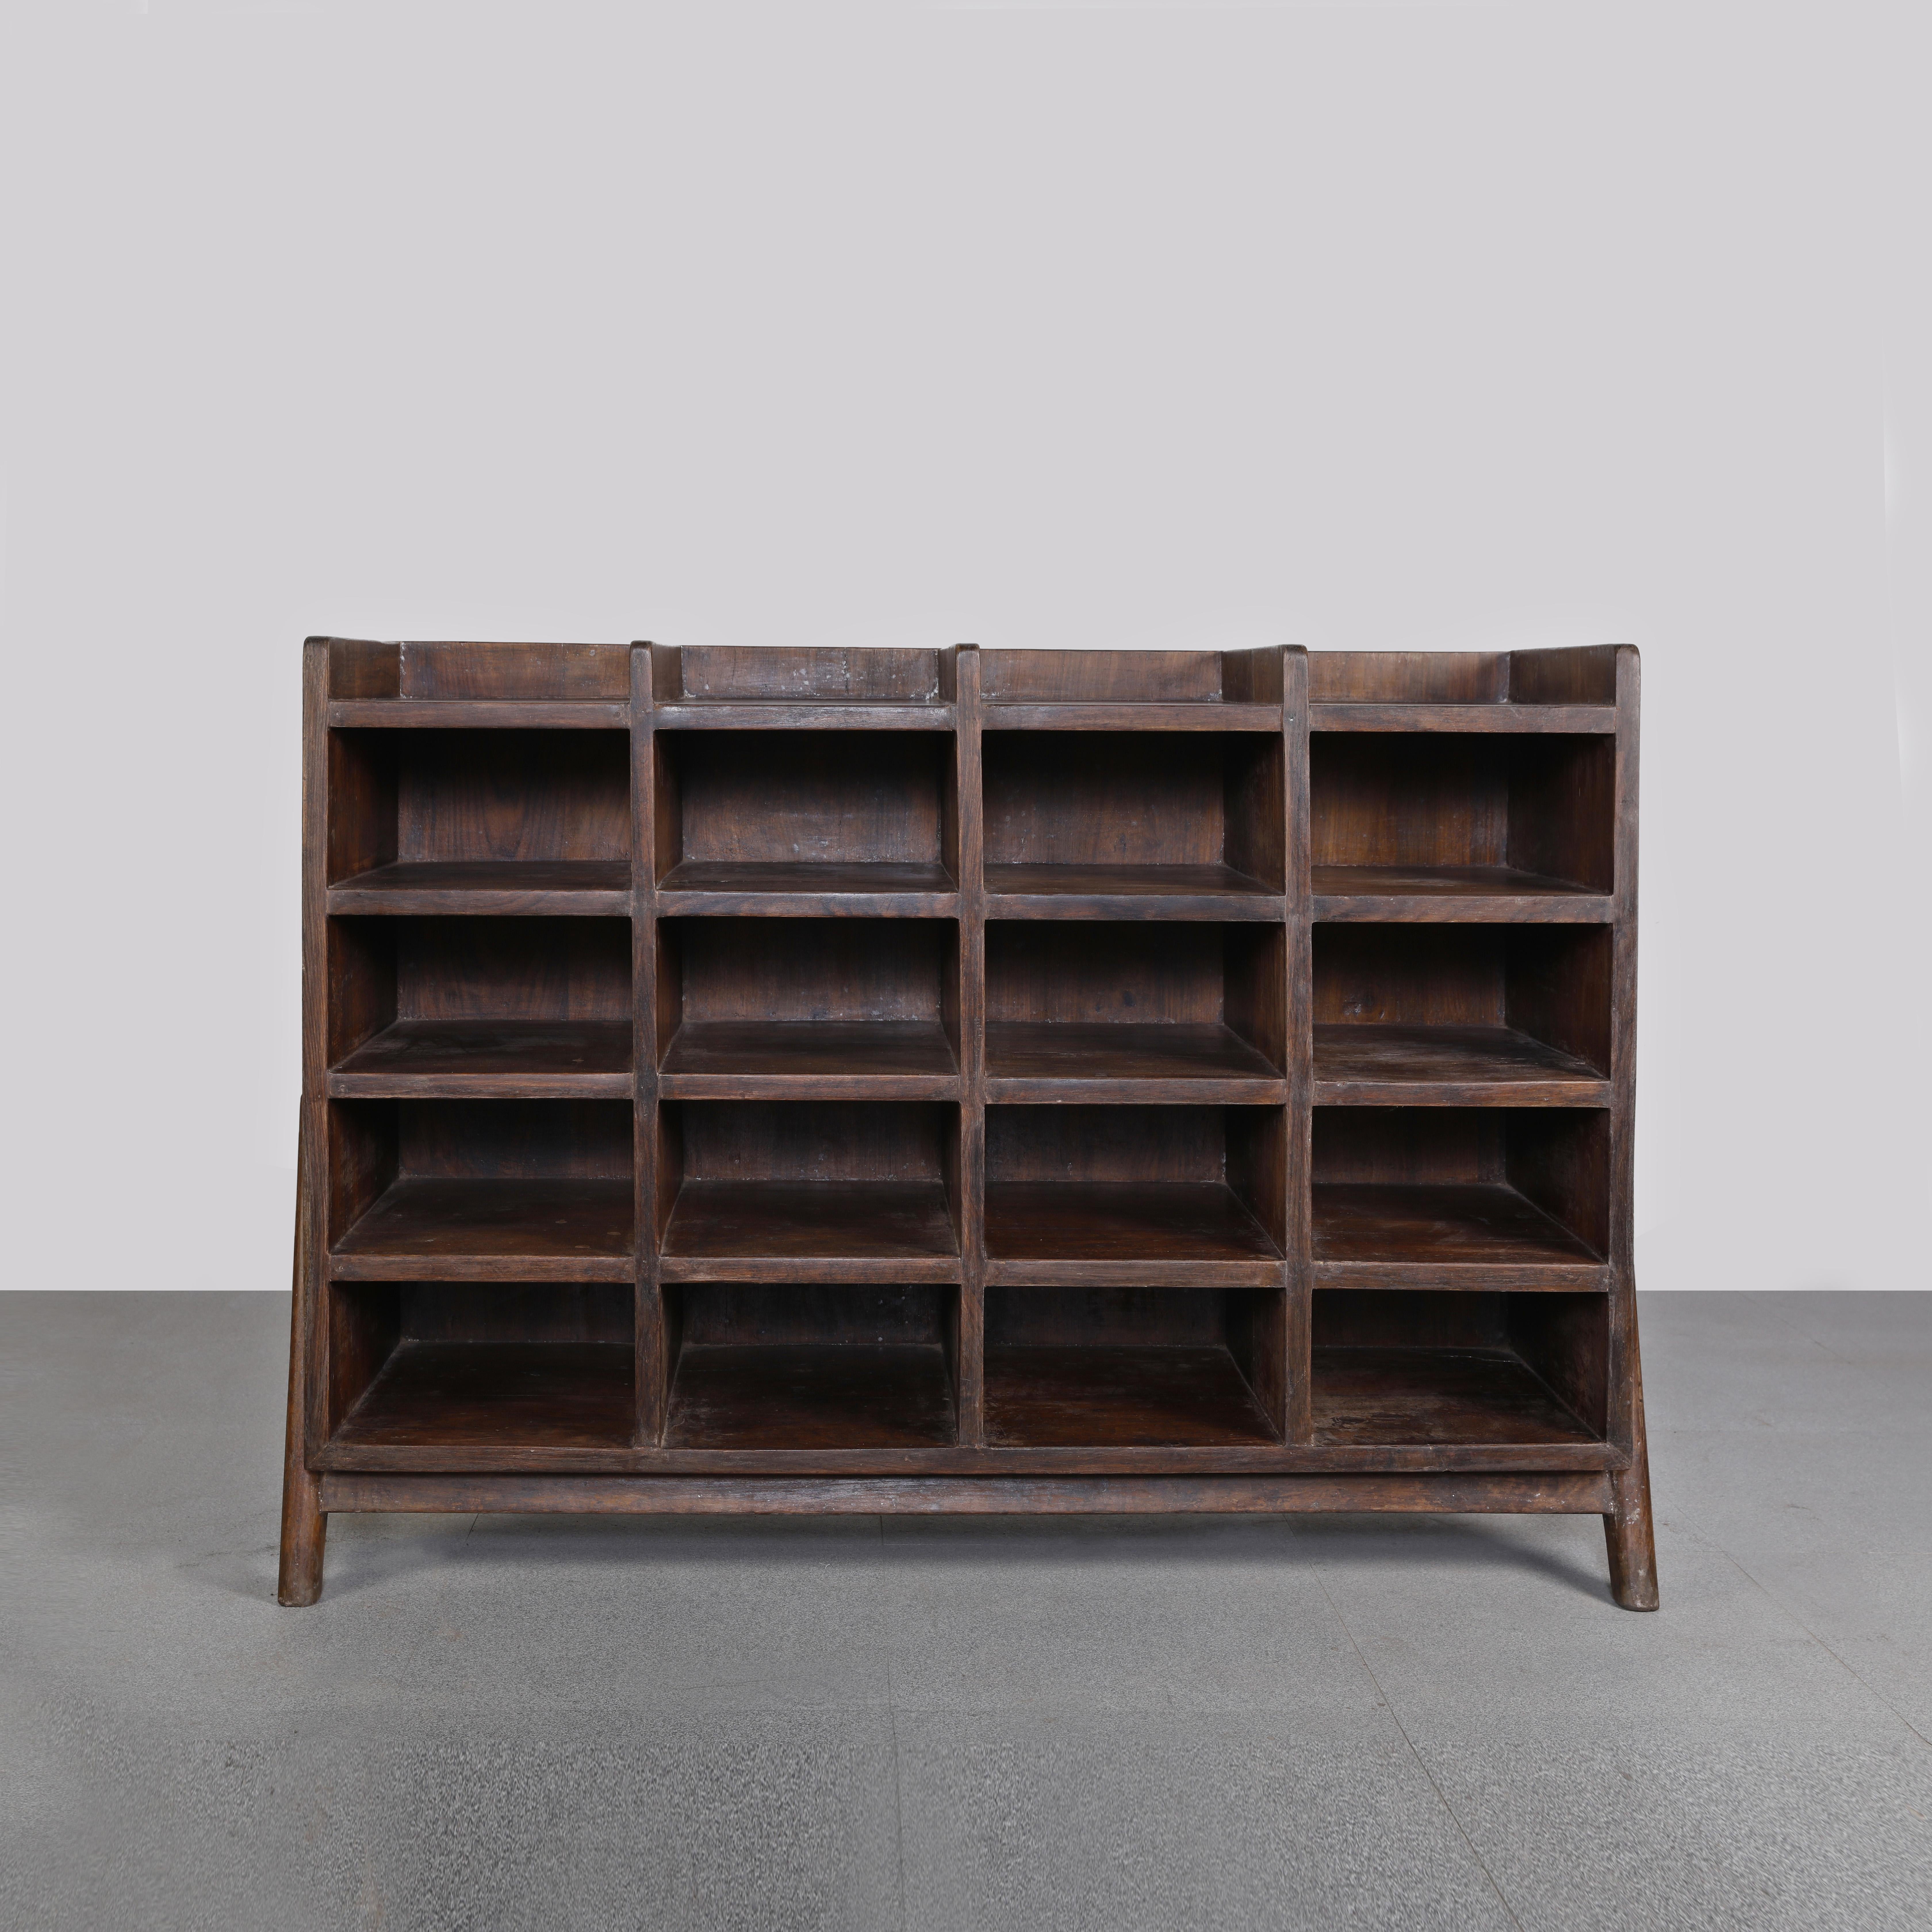 This storage unit with 20 holes is very rare and fantastic piece of solid and elegant piece of furniture in the same time. It is raw in its simplicity of construction. The characteristic legs, combined with the warmth of the solid teak wood make it